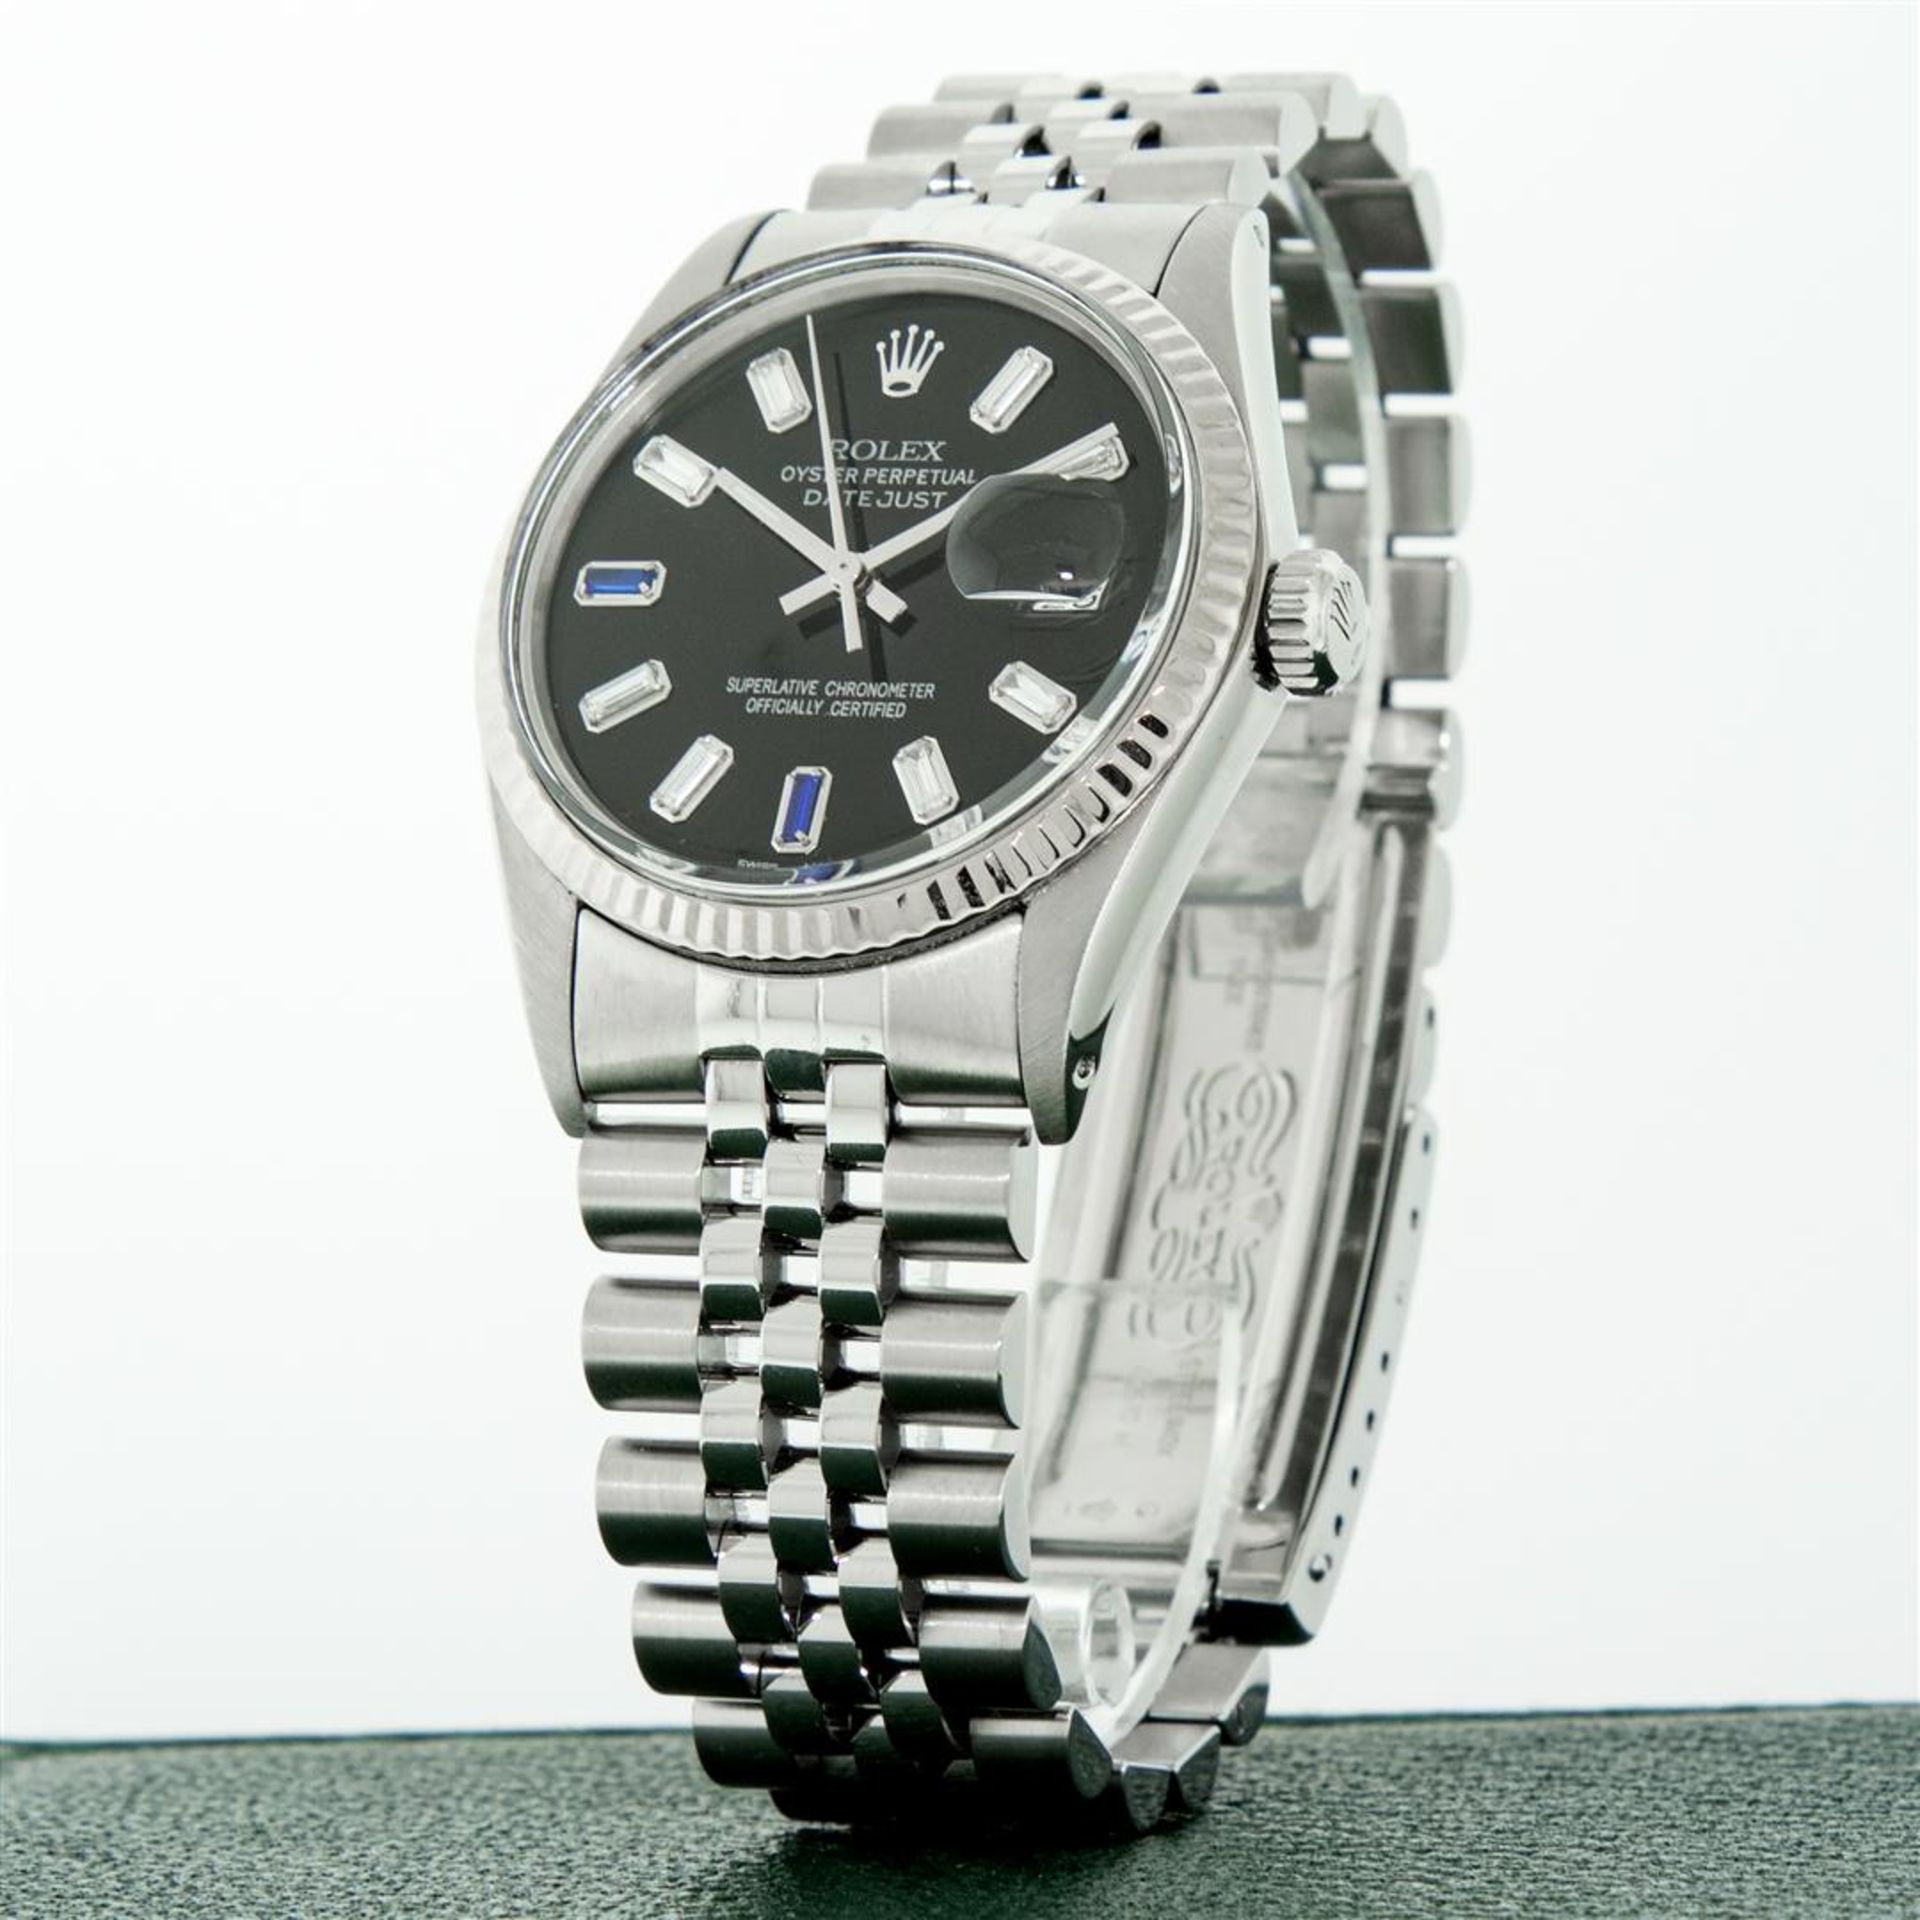 Rolex Mens Stainless Steel 36mm Black Diamond Dial Datejust Wristwatch - Image 2 of 14